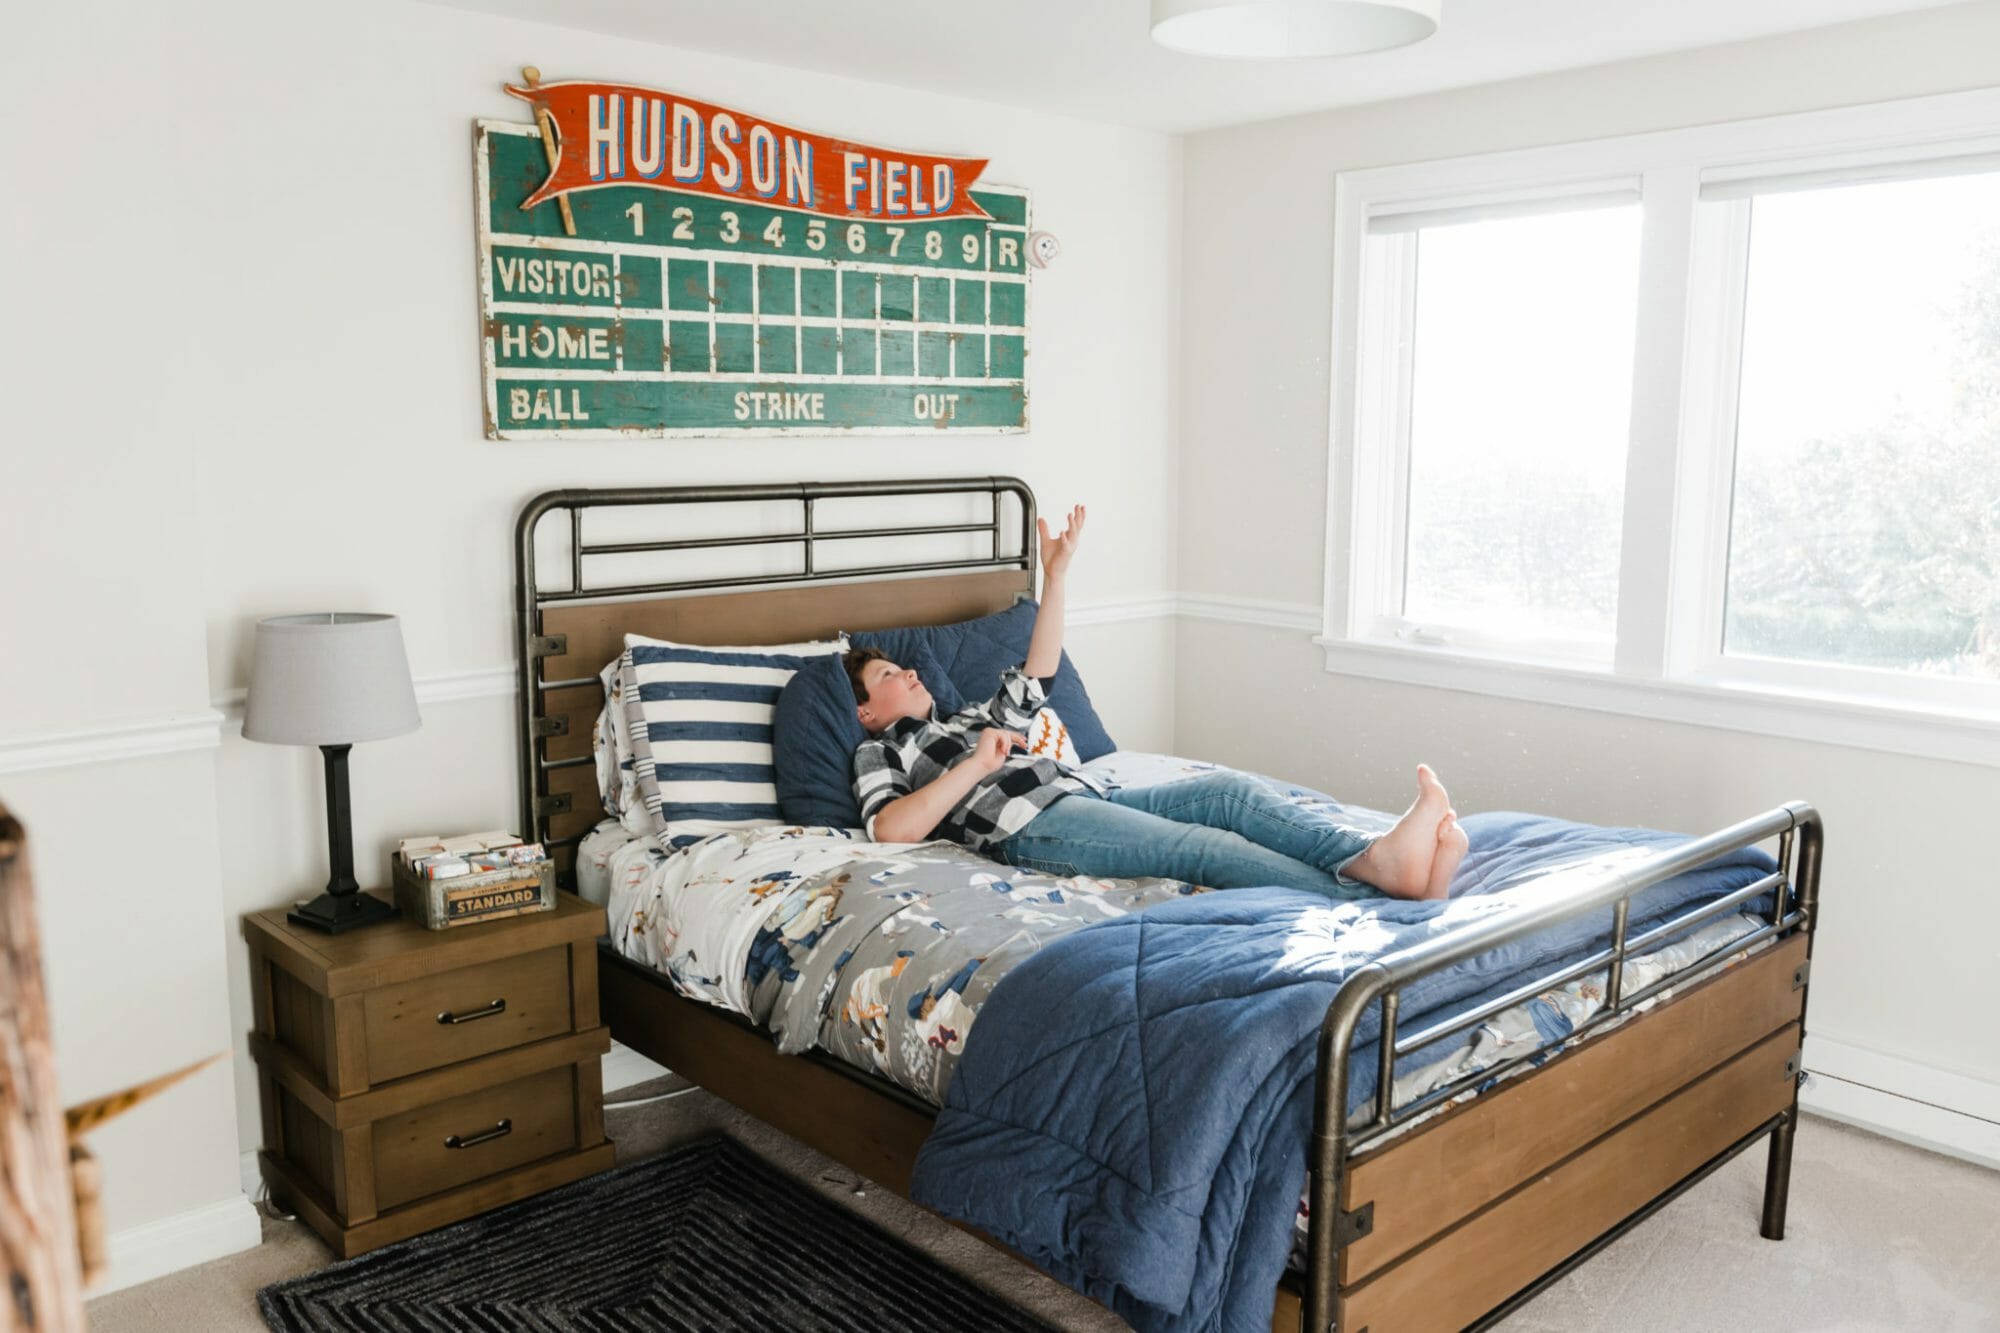 How to Create a Baseball Themed Bedroom with No Decorating Skills